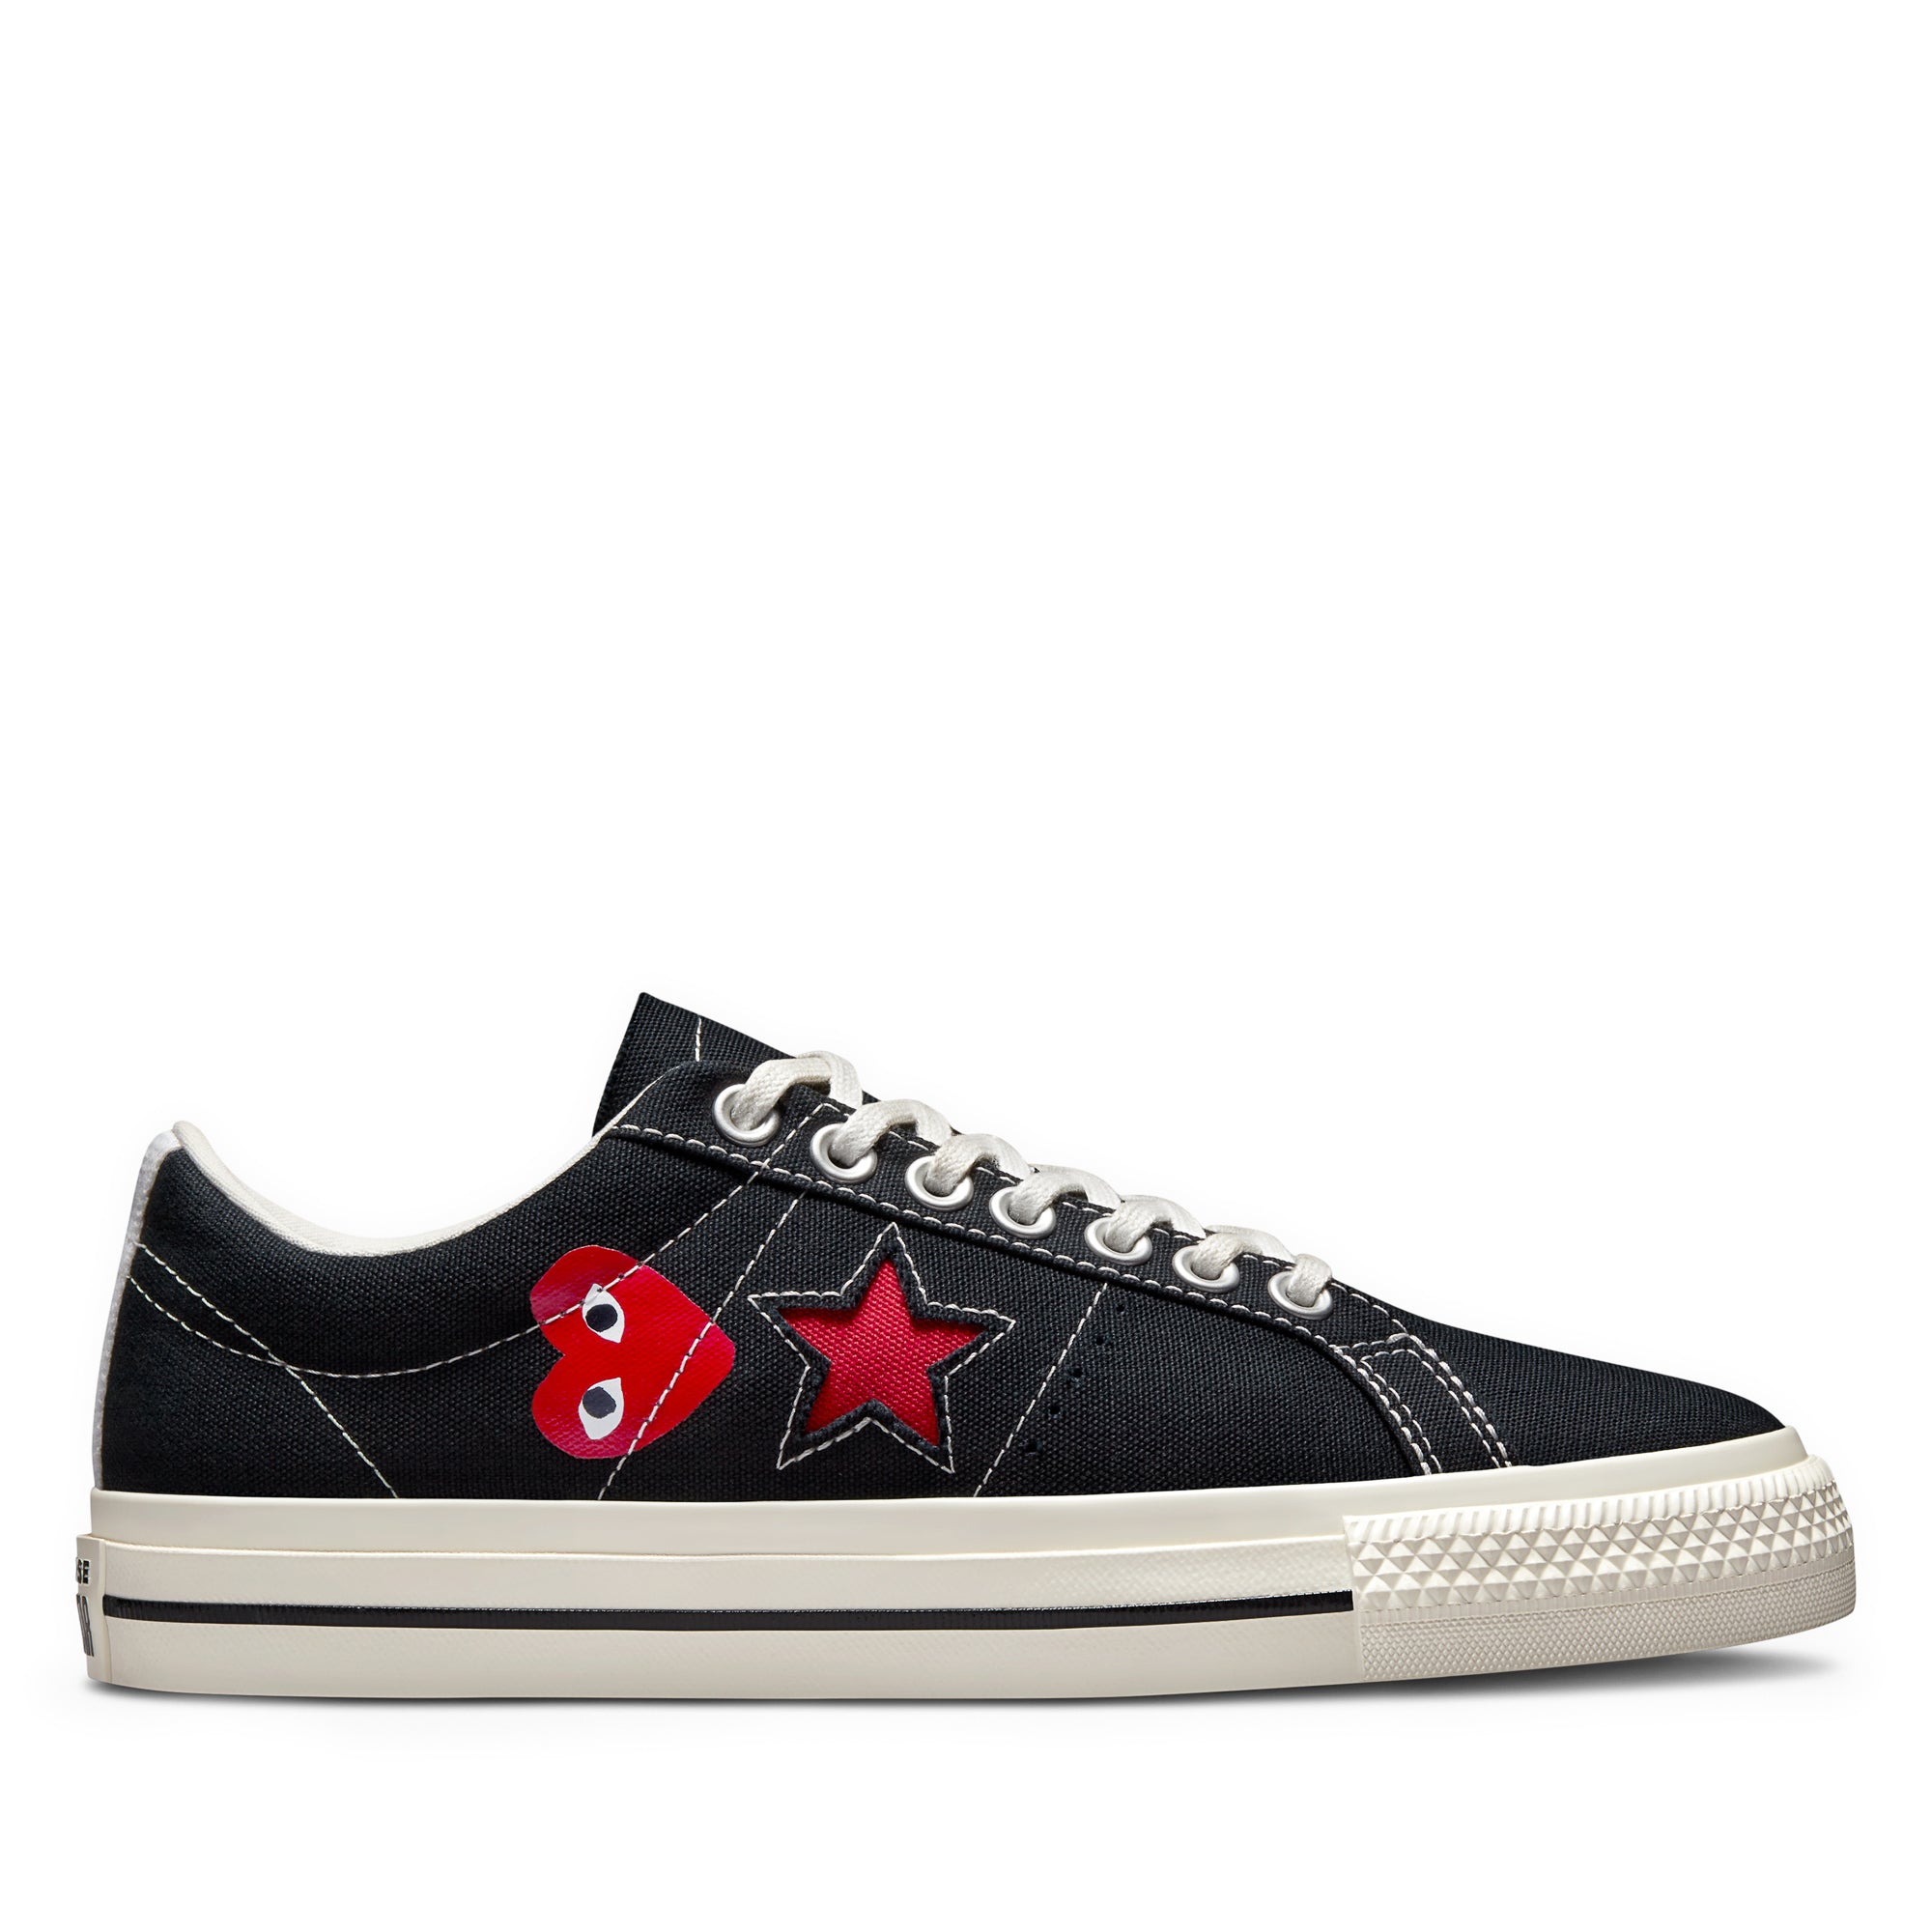 Play Converse - Red Heart One Star - (Black) view 1